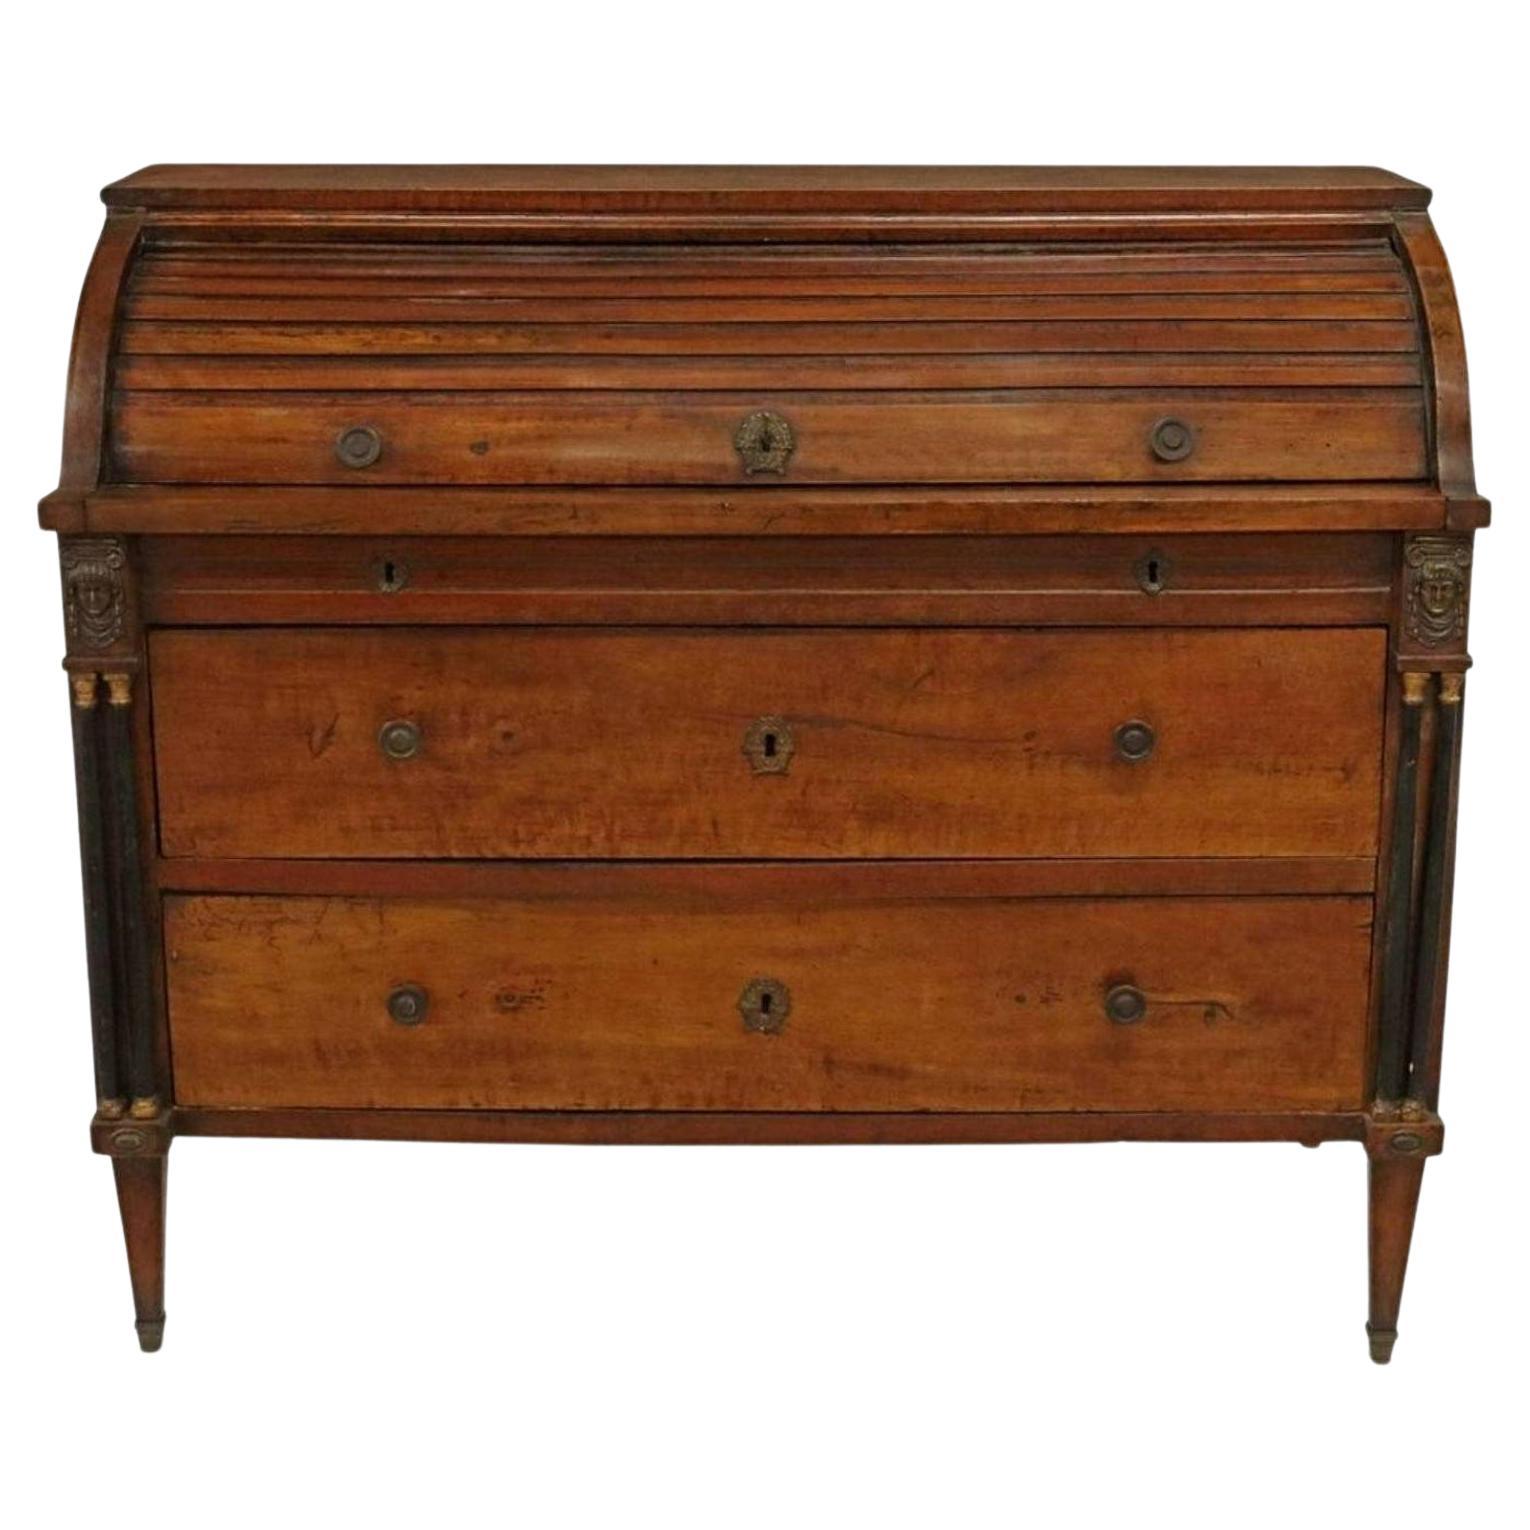 Early 19th Century French Empire Period Bureau a Cylindre Gentleman's Desk For Sale